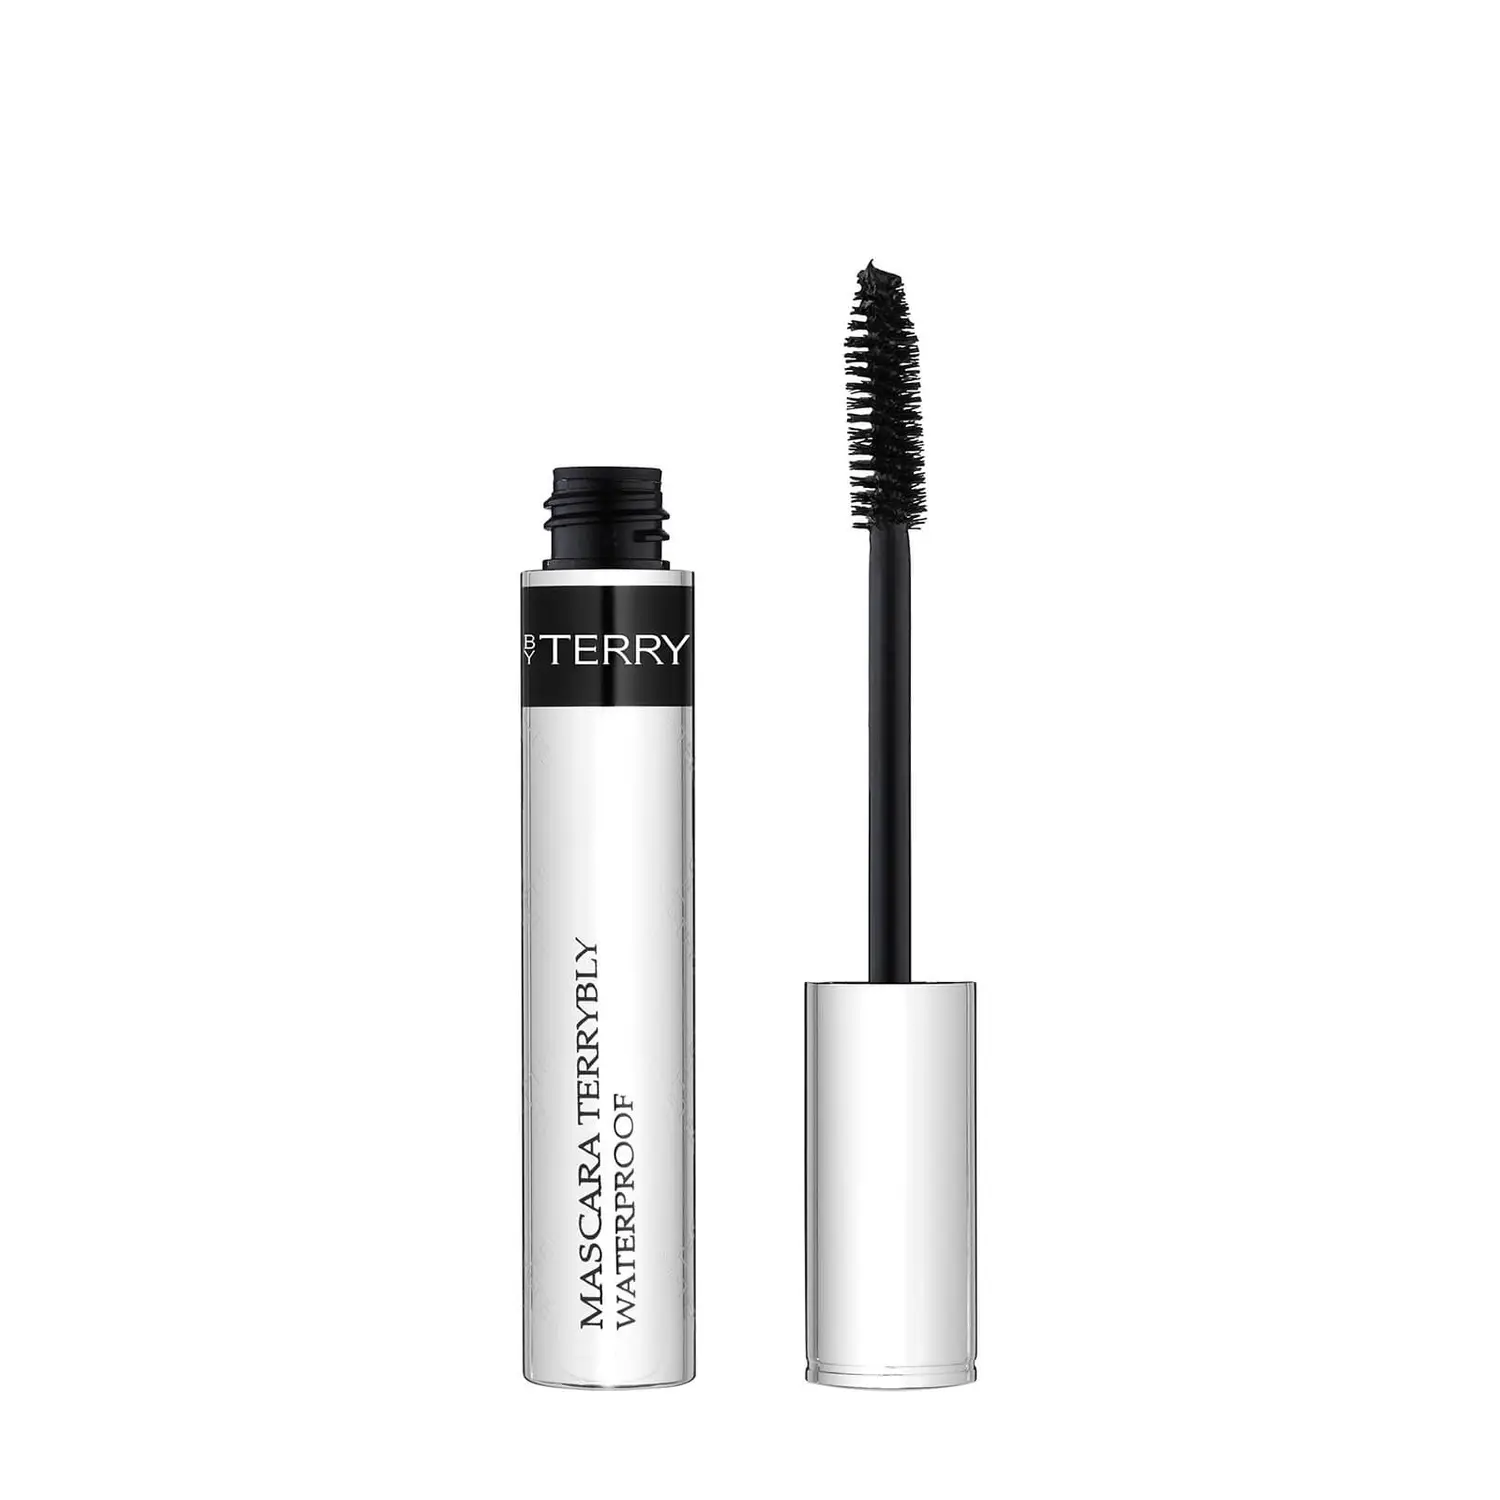 BY TERRY TERRYBLY WATERPROOF MASCARA - BLACK 8G